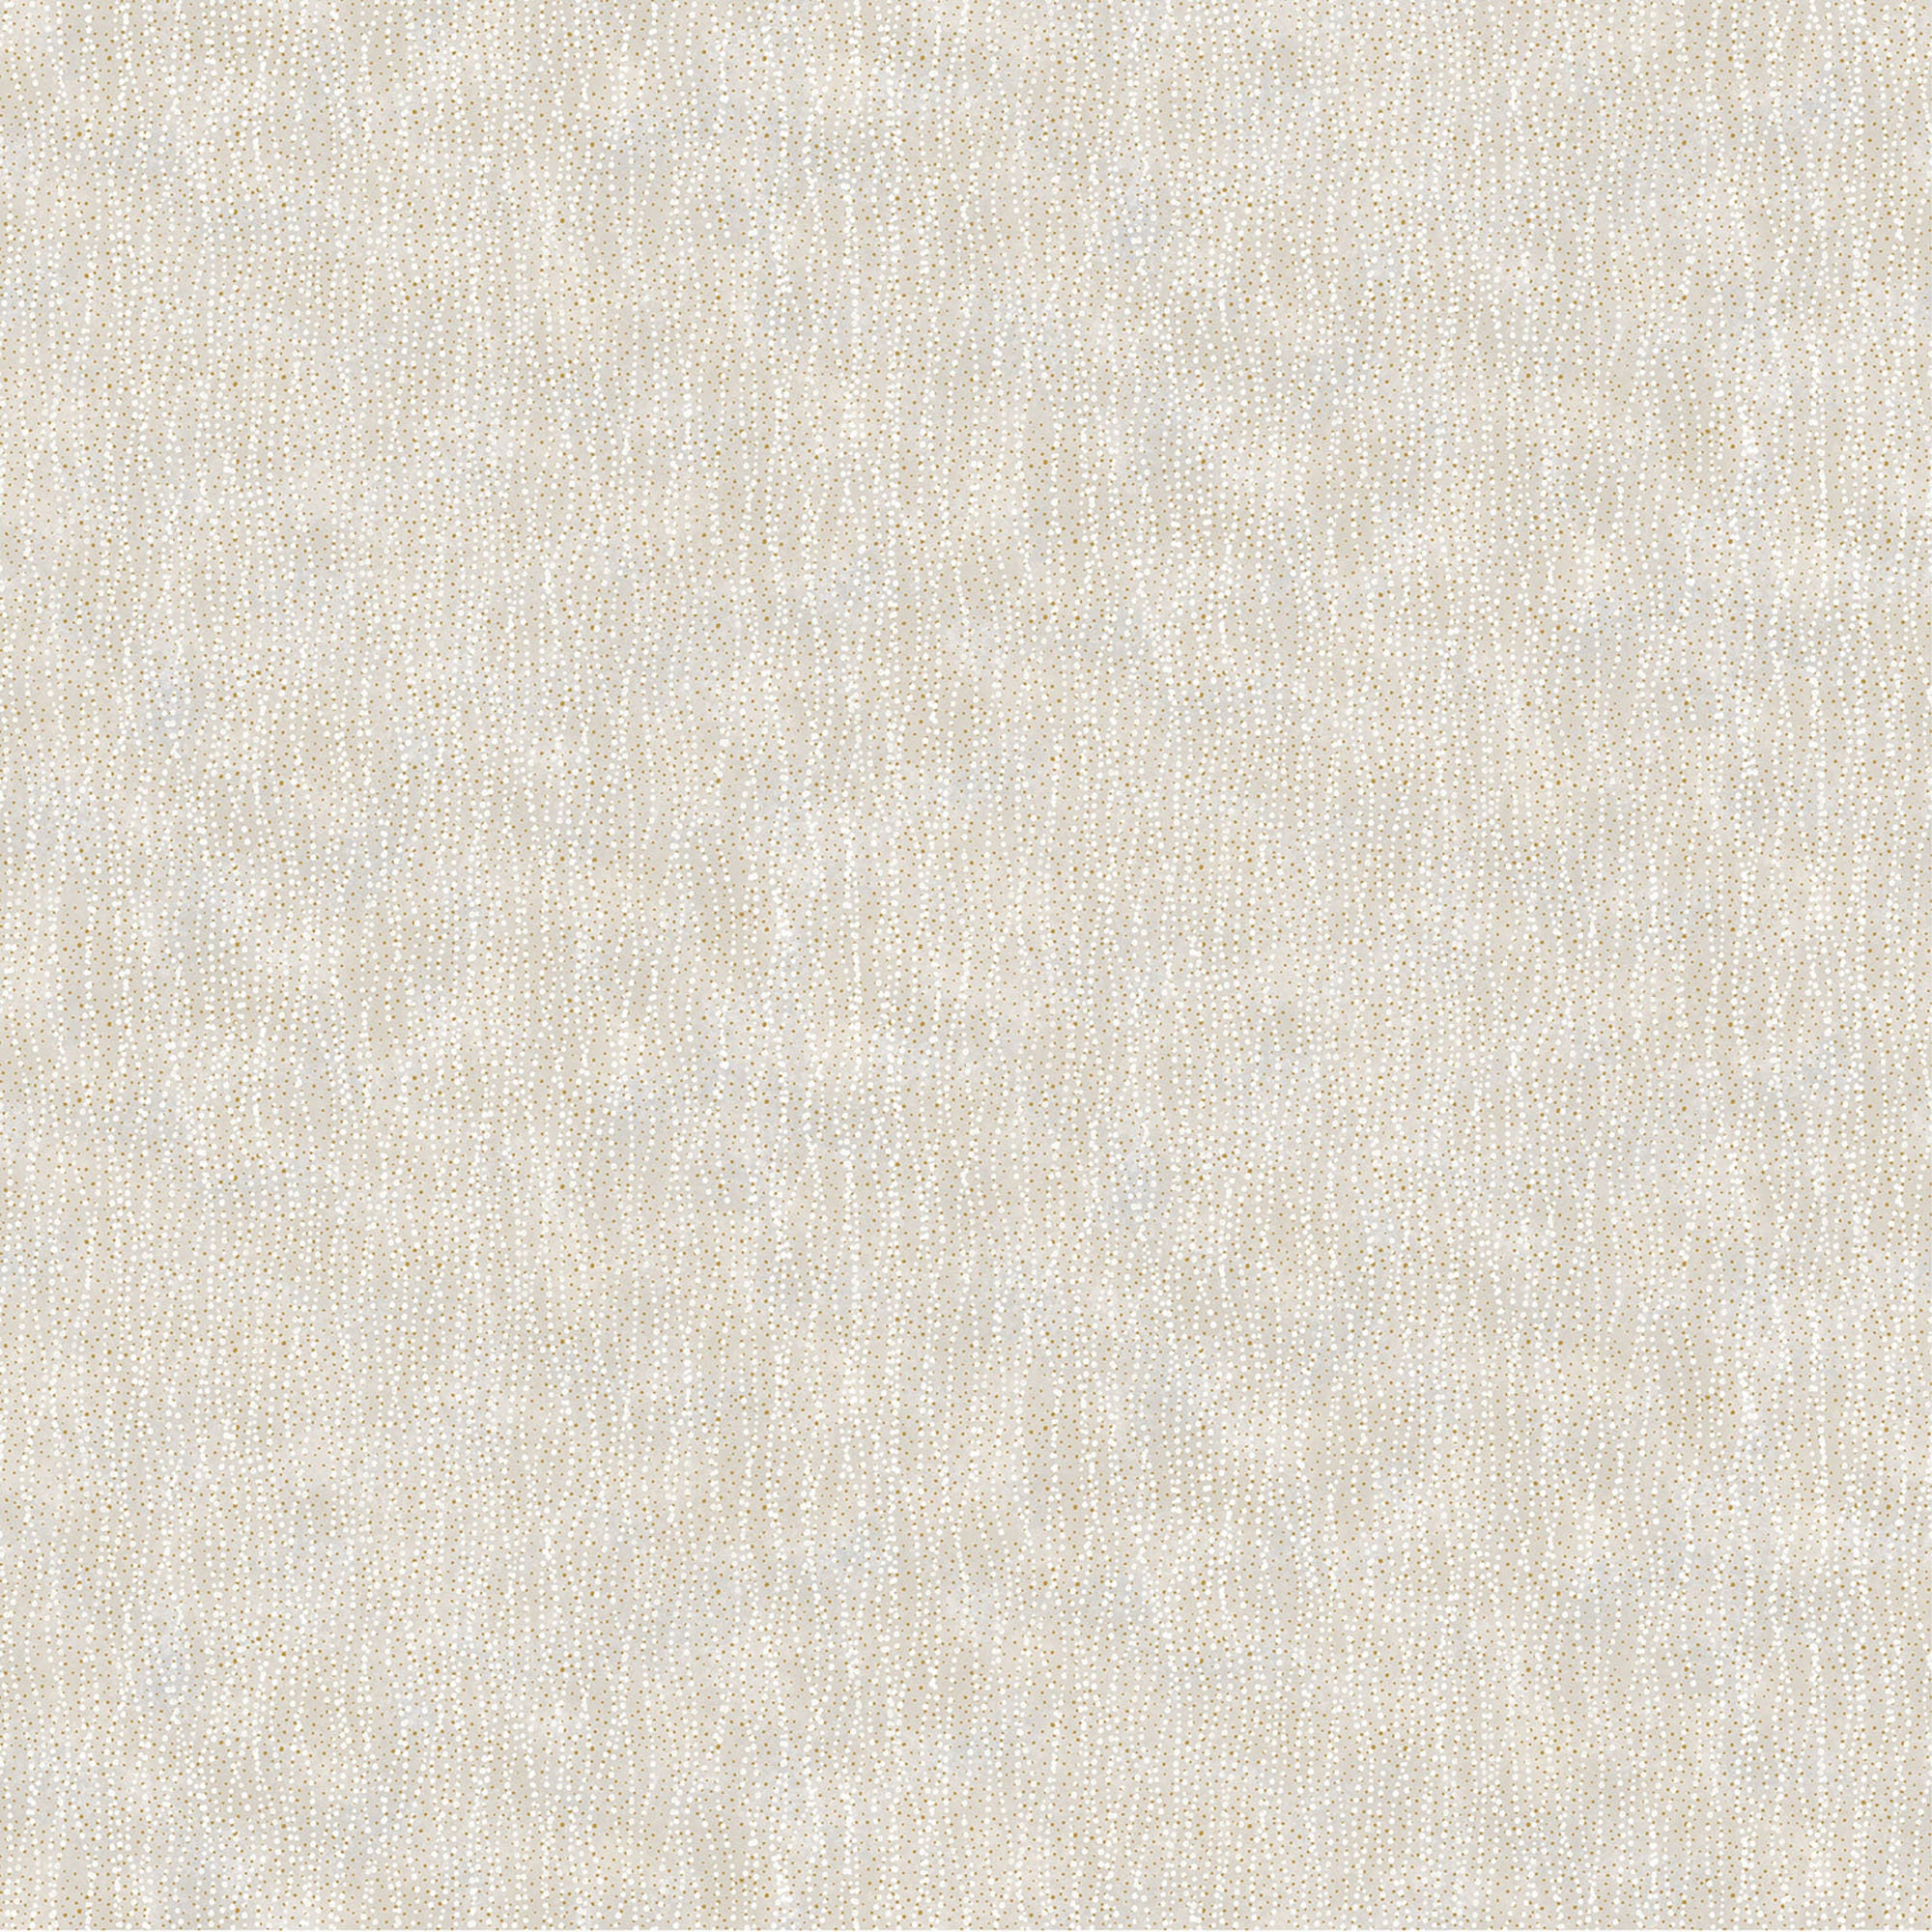 Fantasia Dotted Wave Blender Fabric // Northcott Studio Taupe Grey By The Half Yard